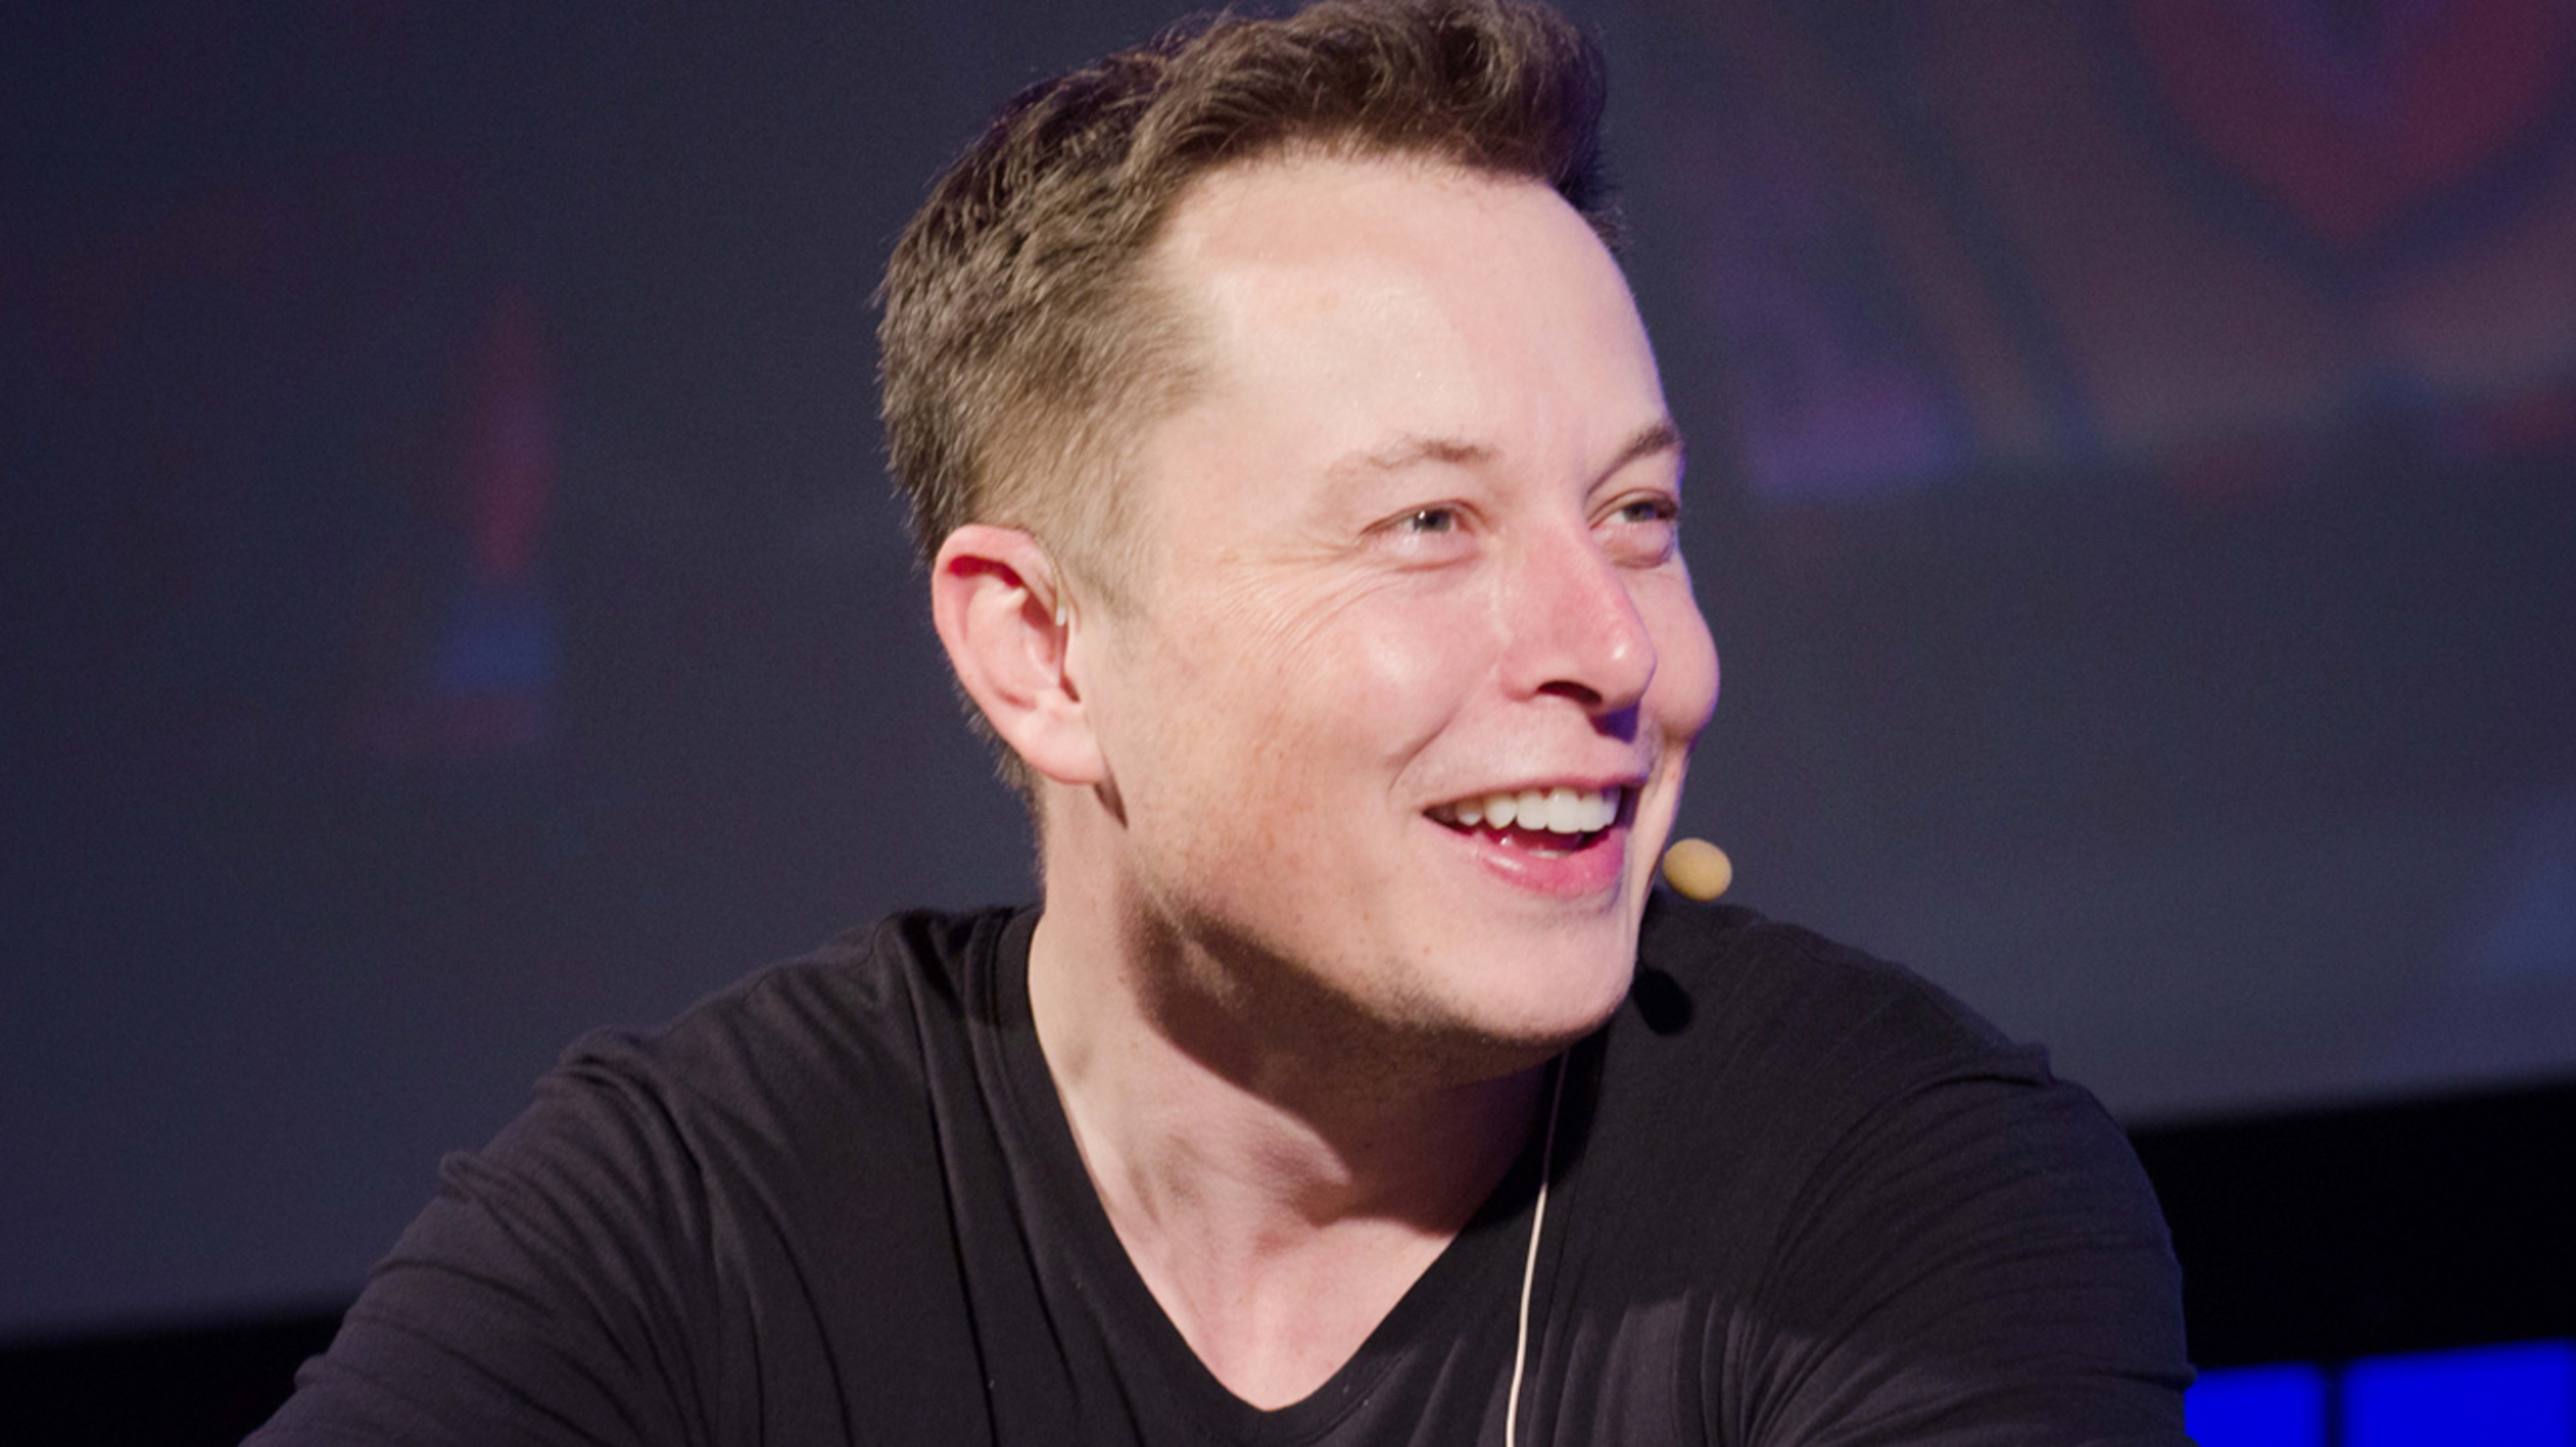 VC guy urges Elon Musk to calm the f*ck down